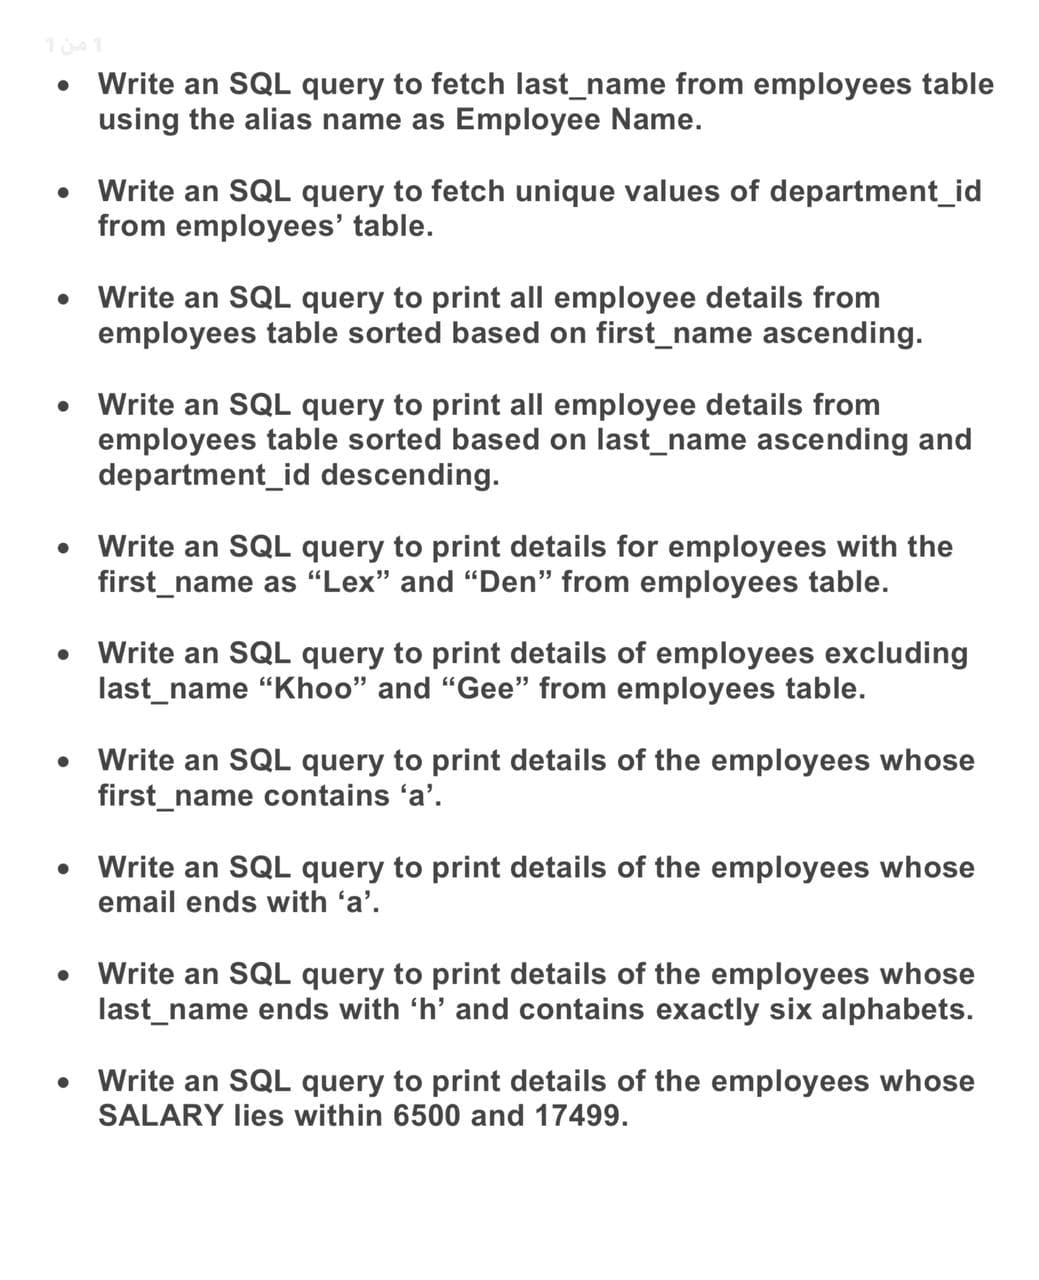 Write an SQL query to fetch last_name from employees table
using the alias name as Employee Name.
• Write an SQL query to fetch unique values of department_id
from employees' table.
Write an SQL query to print all employee details from
employees table sorted based on first_name ascending.
Write an SQL query to print all employee details from
employees table sorted based on last_name ascending and
department_id descending.
Write an SQL query to print details for employees with the
first_name as “Lex" and "Den" from employees table.
Write an SQL query to print details of employees excluding
last_name "Khoo" and "Gee" from employees table.
• Write an SQL query to print details of the employees whose
first_name contains 'a'.
• Write an SQL query to print details of the employees whose
email ends with 'a'.
Write an SQL query to print details of the employees whose
last_name ends with 'h' and contains exactly six alphabets.
• Write an SQL query to print details of the employees whose
SALARY lies within 6500 and 17499.
